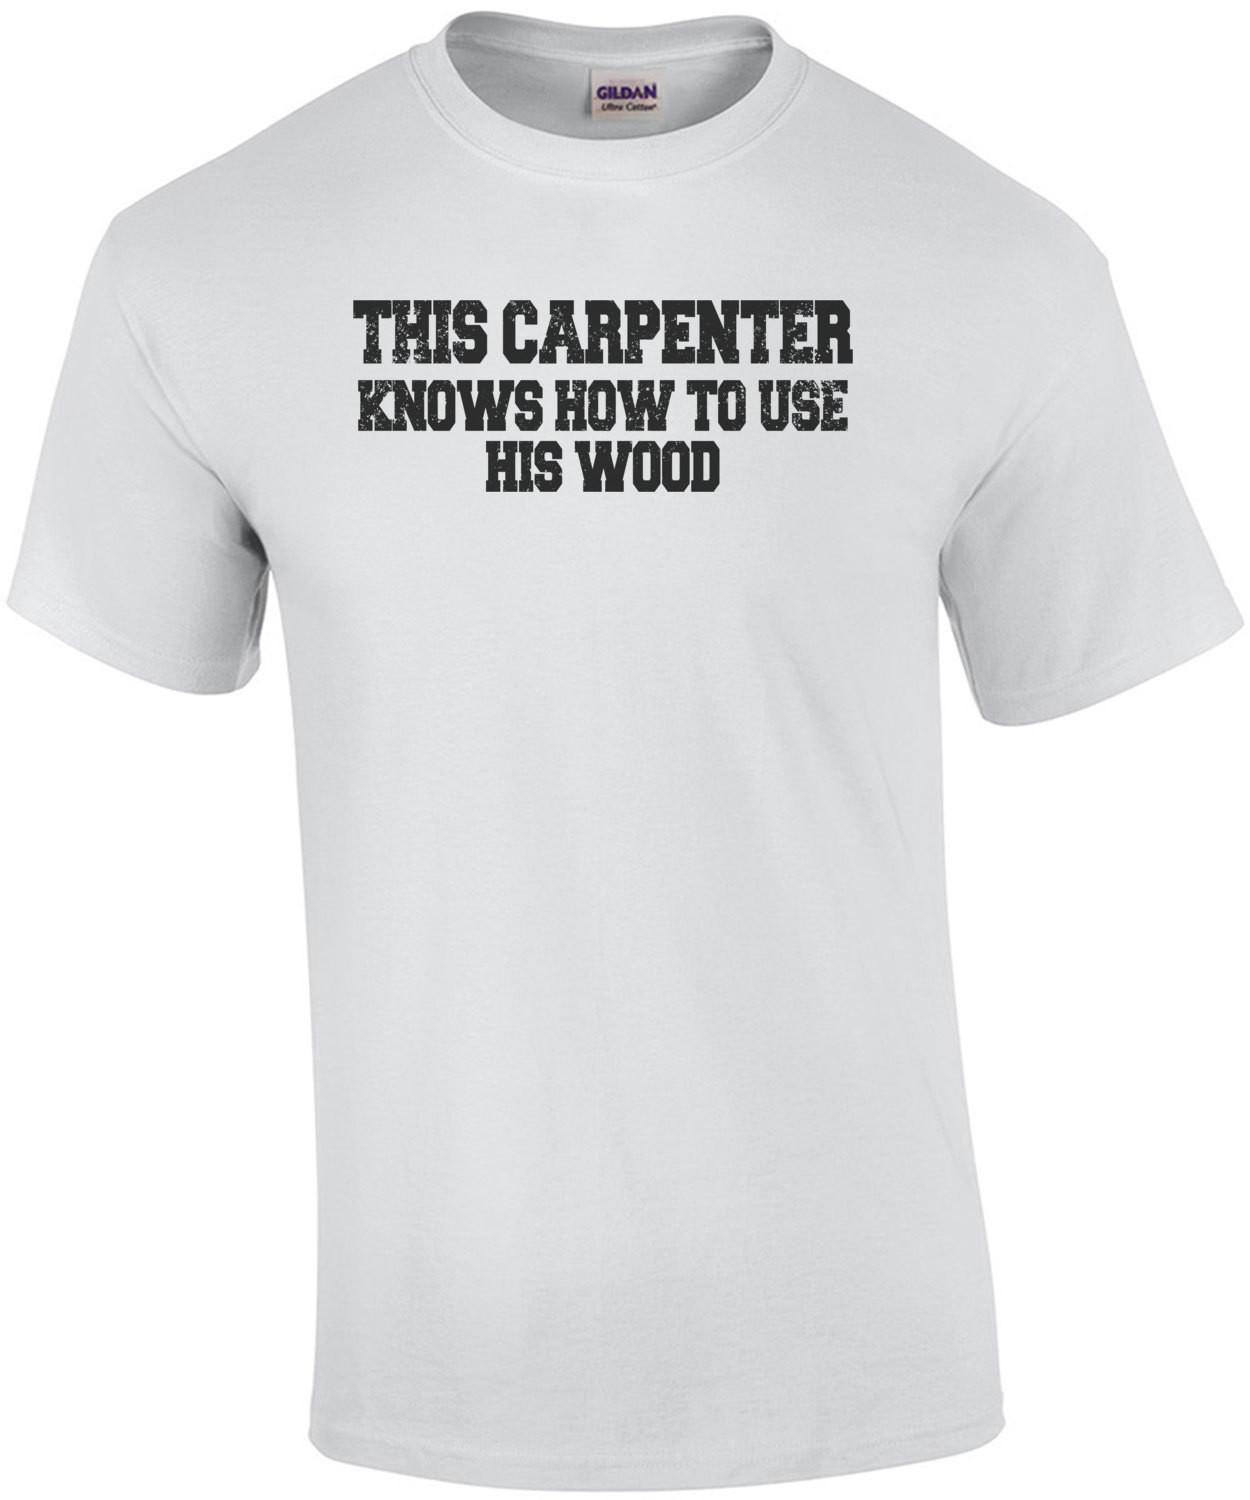 This Carpenter Knows How To Use His Wood T-Shirt